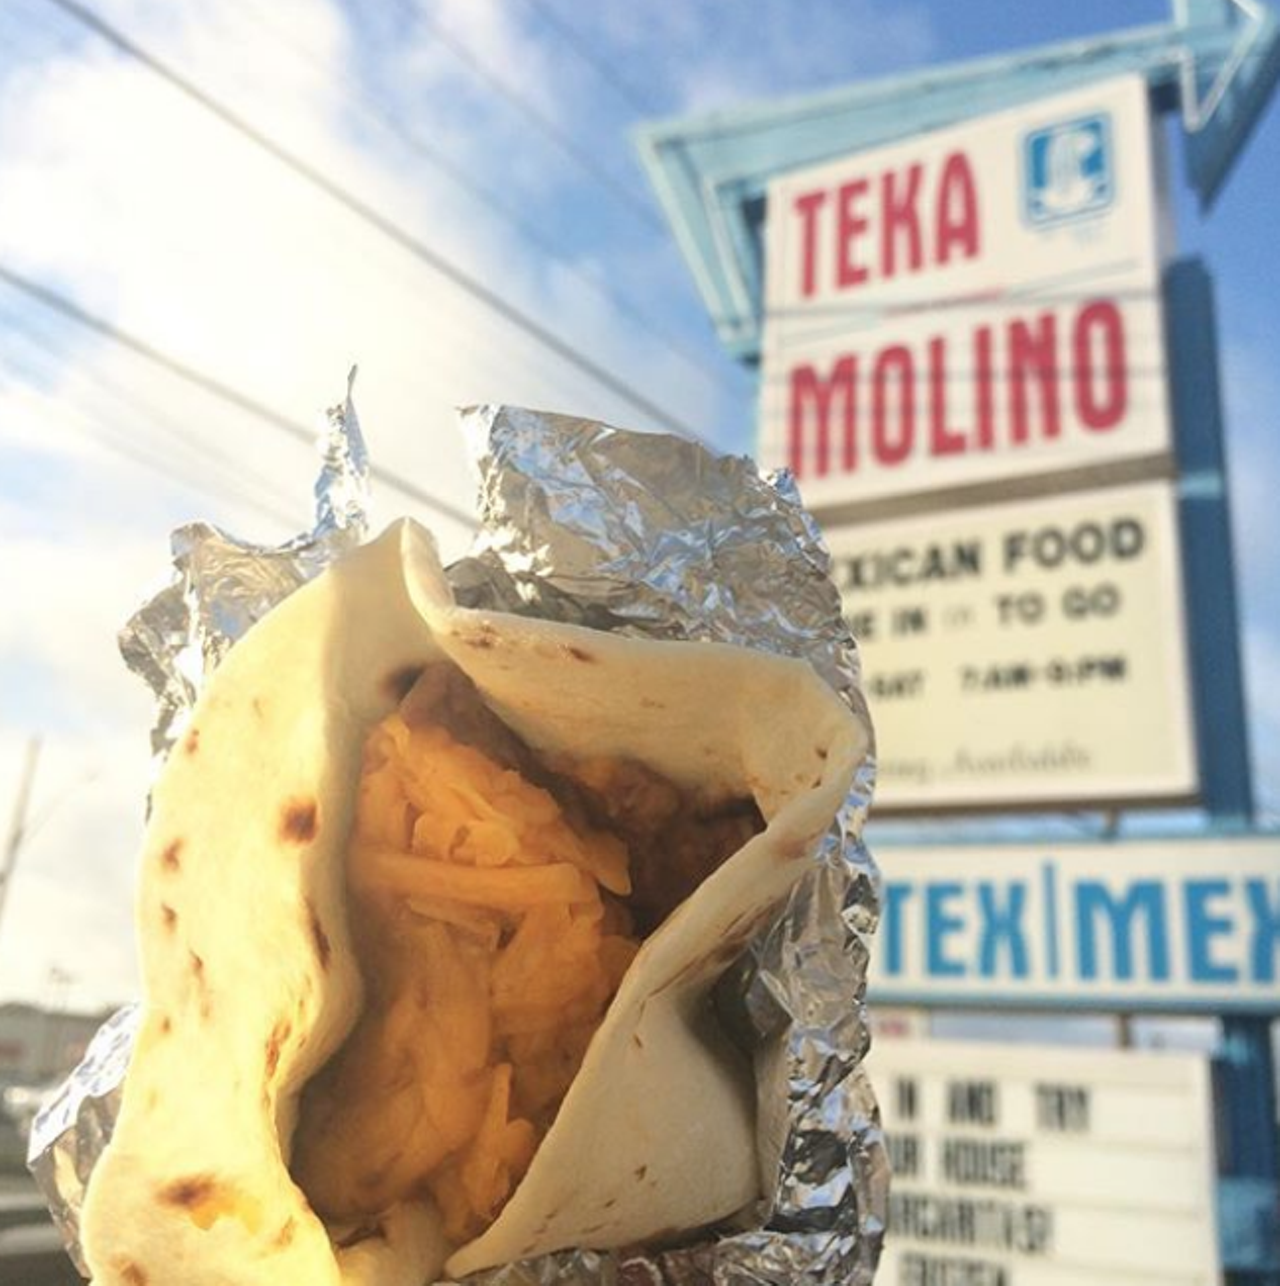 Teka Molino
Multiple locations, tekamolino.com
More than 60 years in business have made Teka a first stop when on the prowl for tortillas de maiz. Stop in to eat or grab your stuff to go, just make sure tortillas are part of your order. 
Photo via Instagram / tacosr4lovers